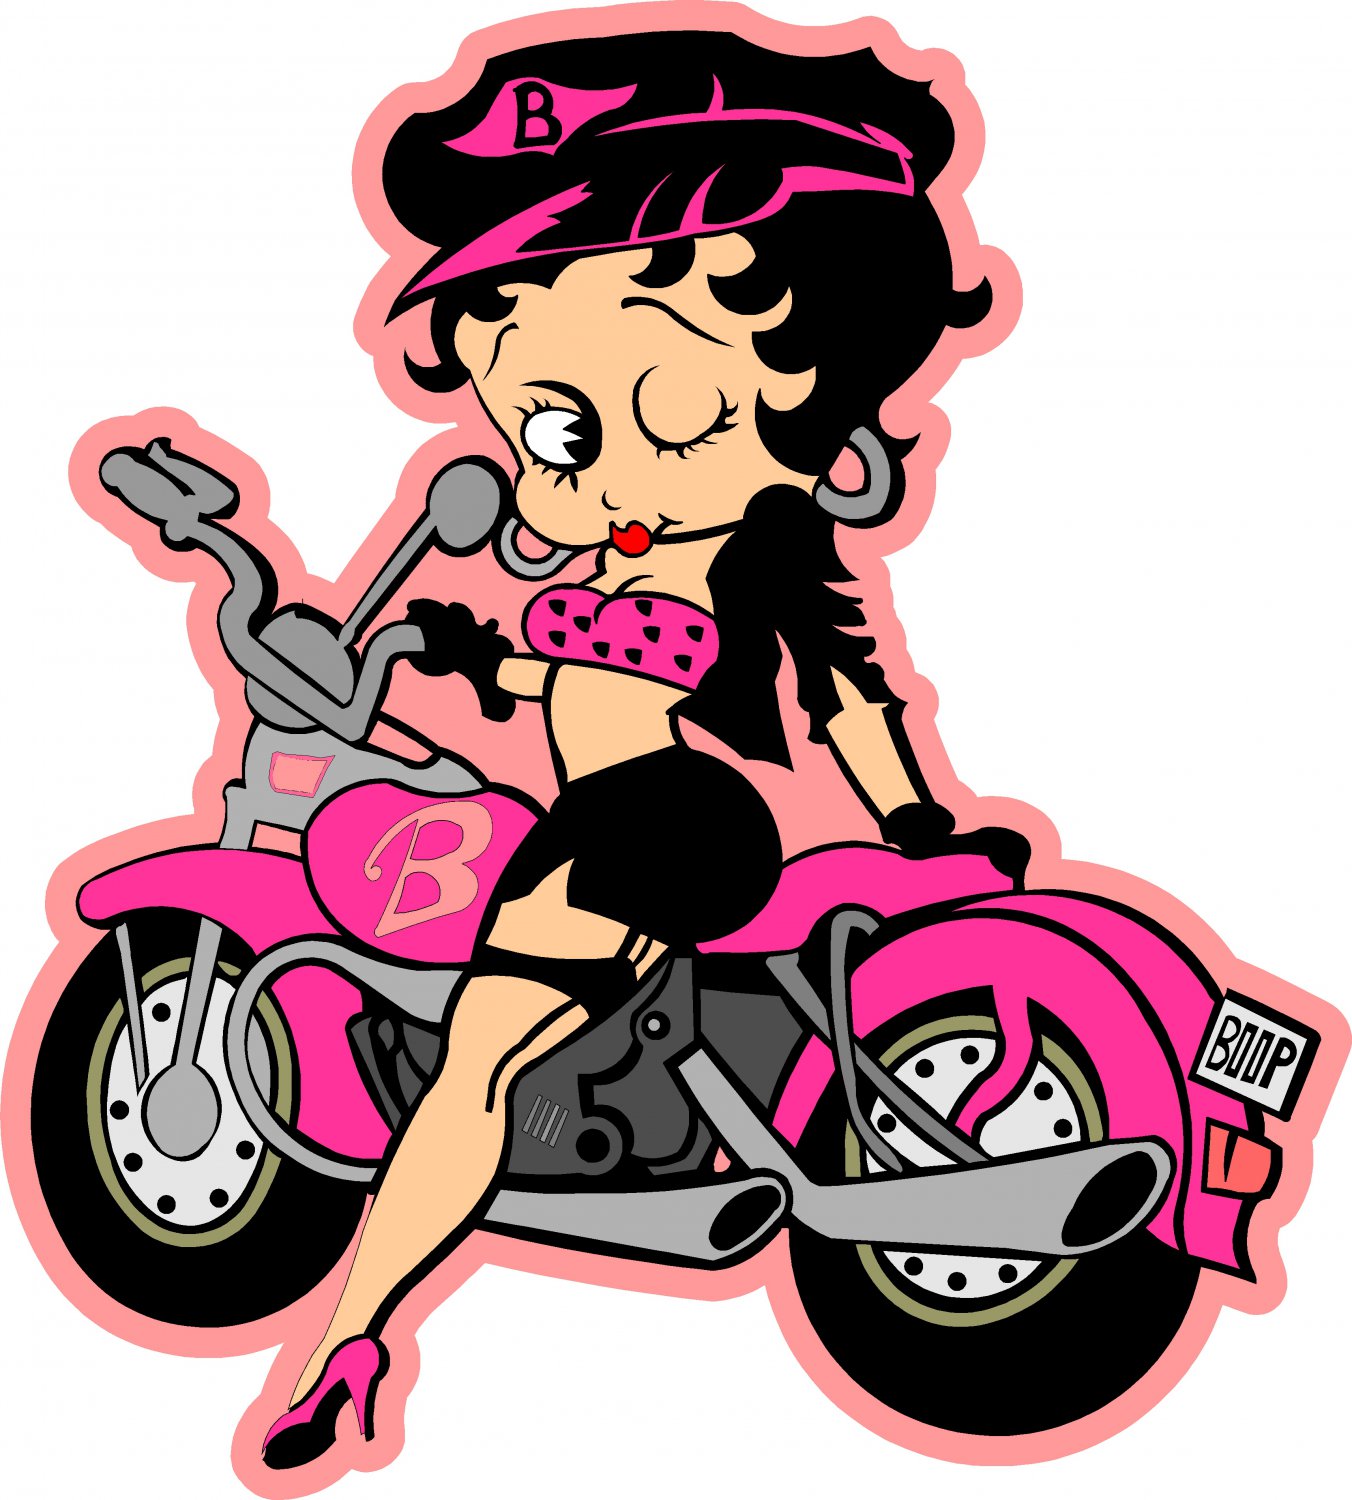 betty boop on a motorcycle